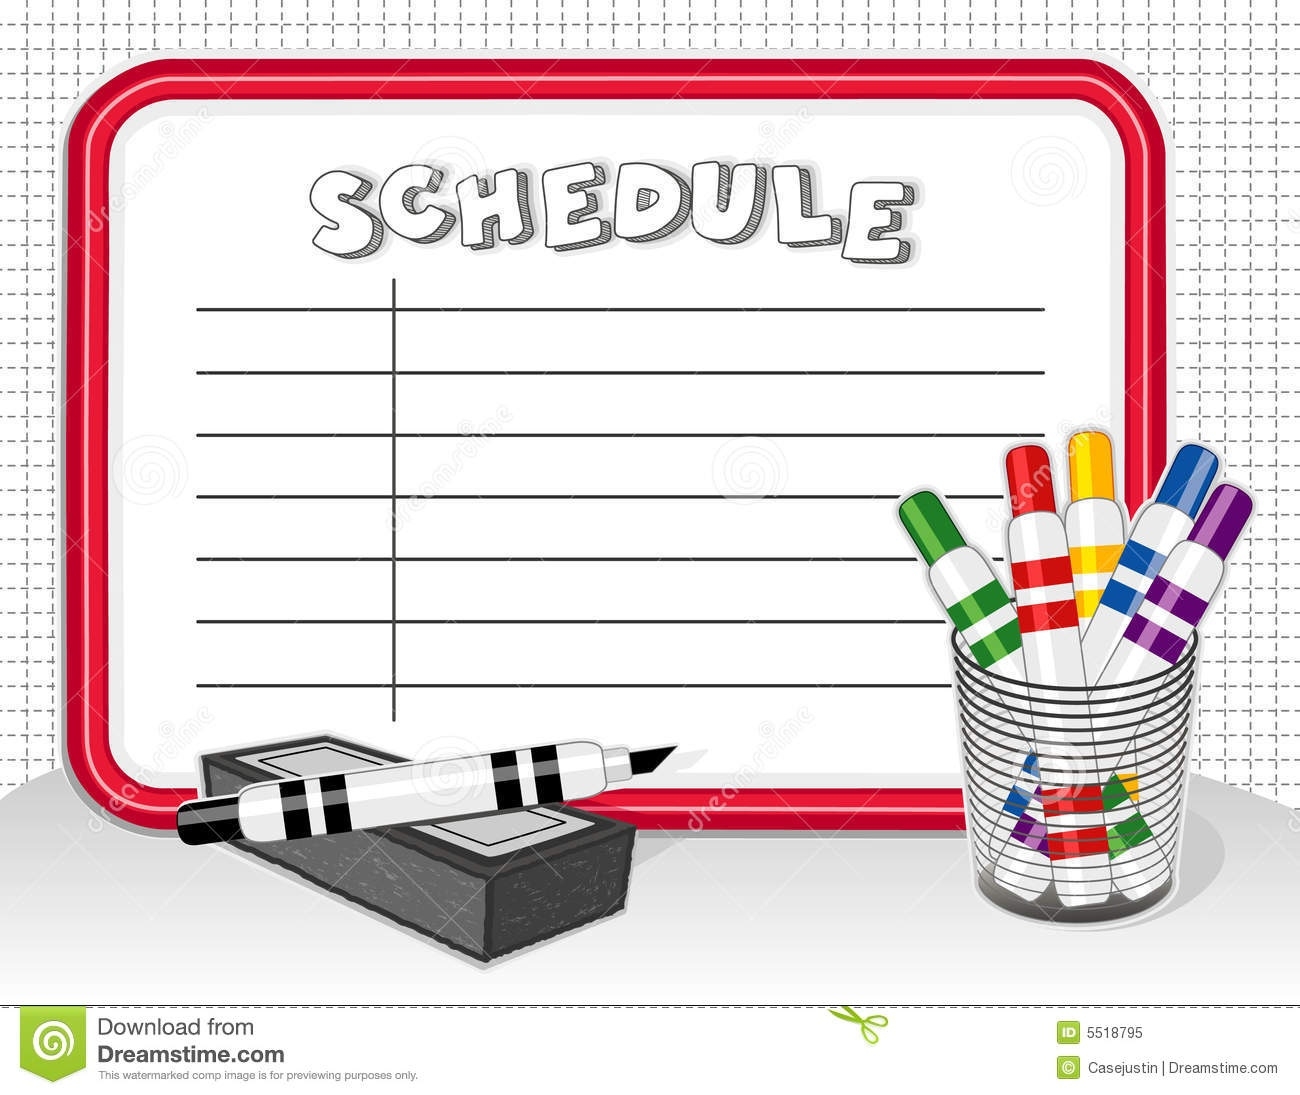 Free Classroom Schedule Clipart Free Images At Clker - vrogue.co